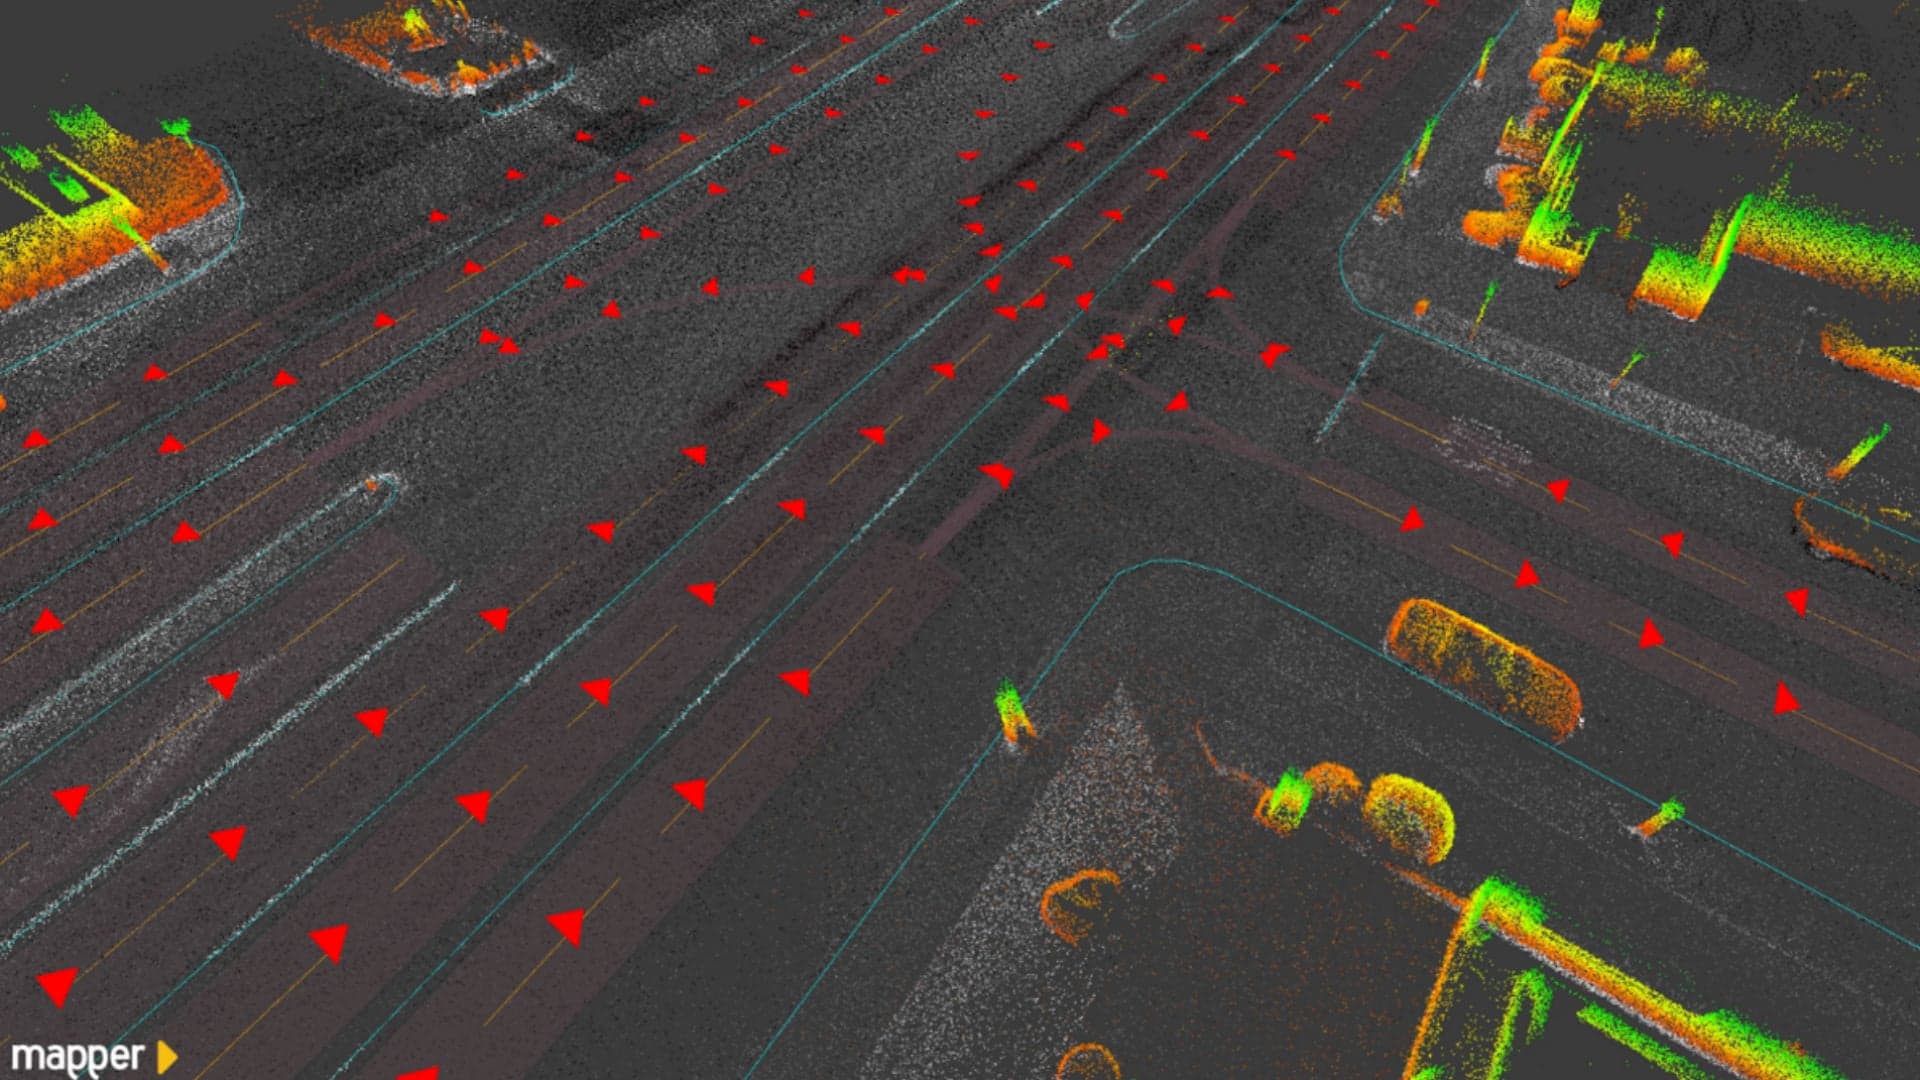 Mapper is Using Uber-Precise Road Scanners to Help Develop Autonomous Cars for the Future